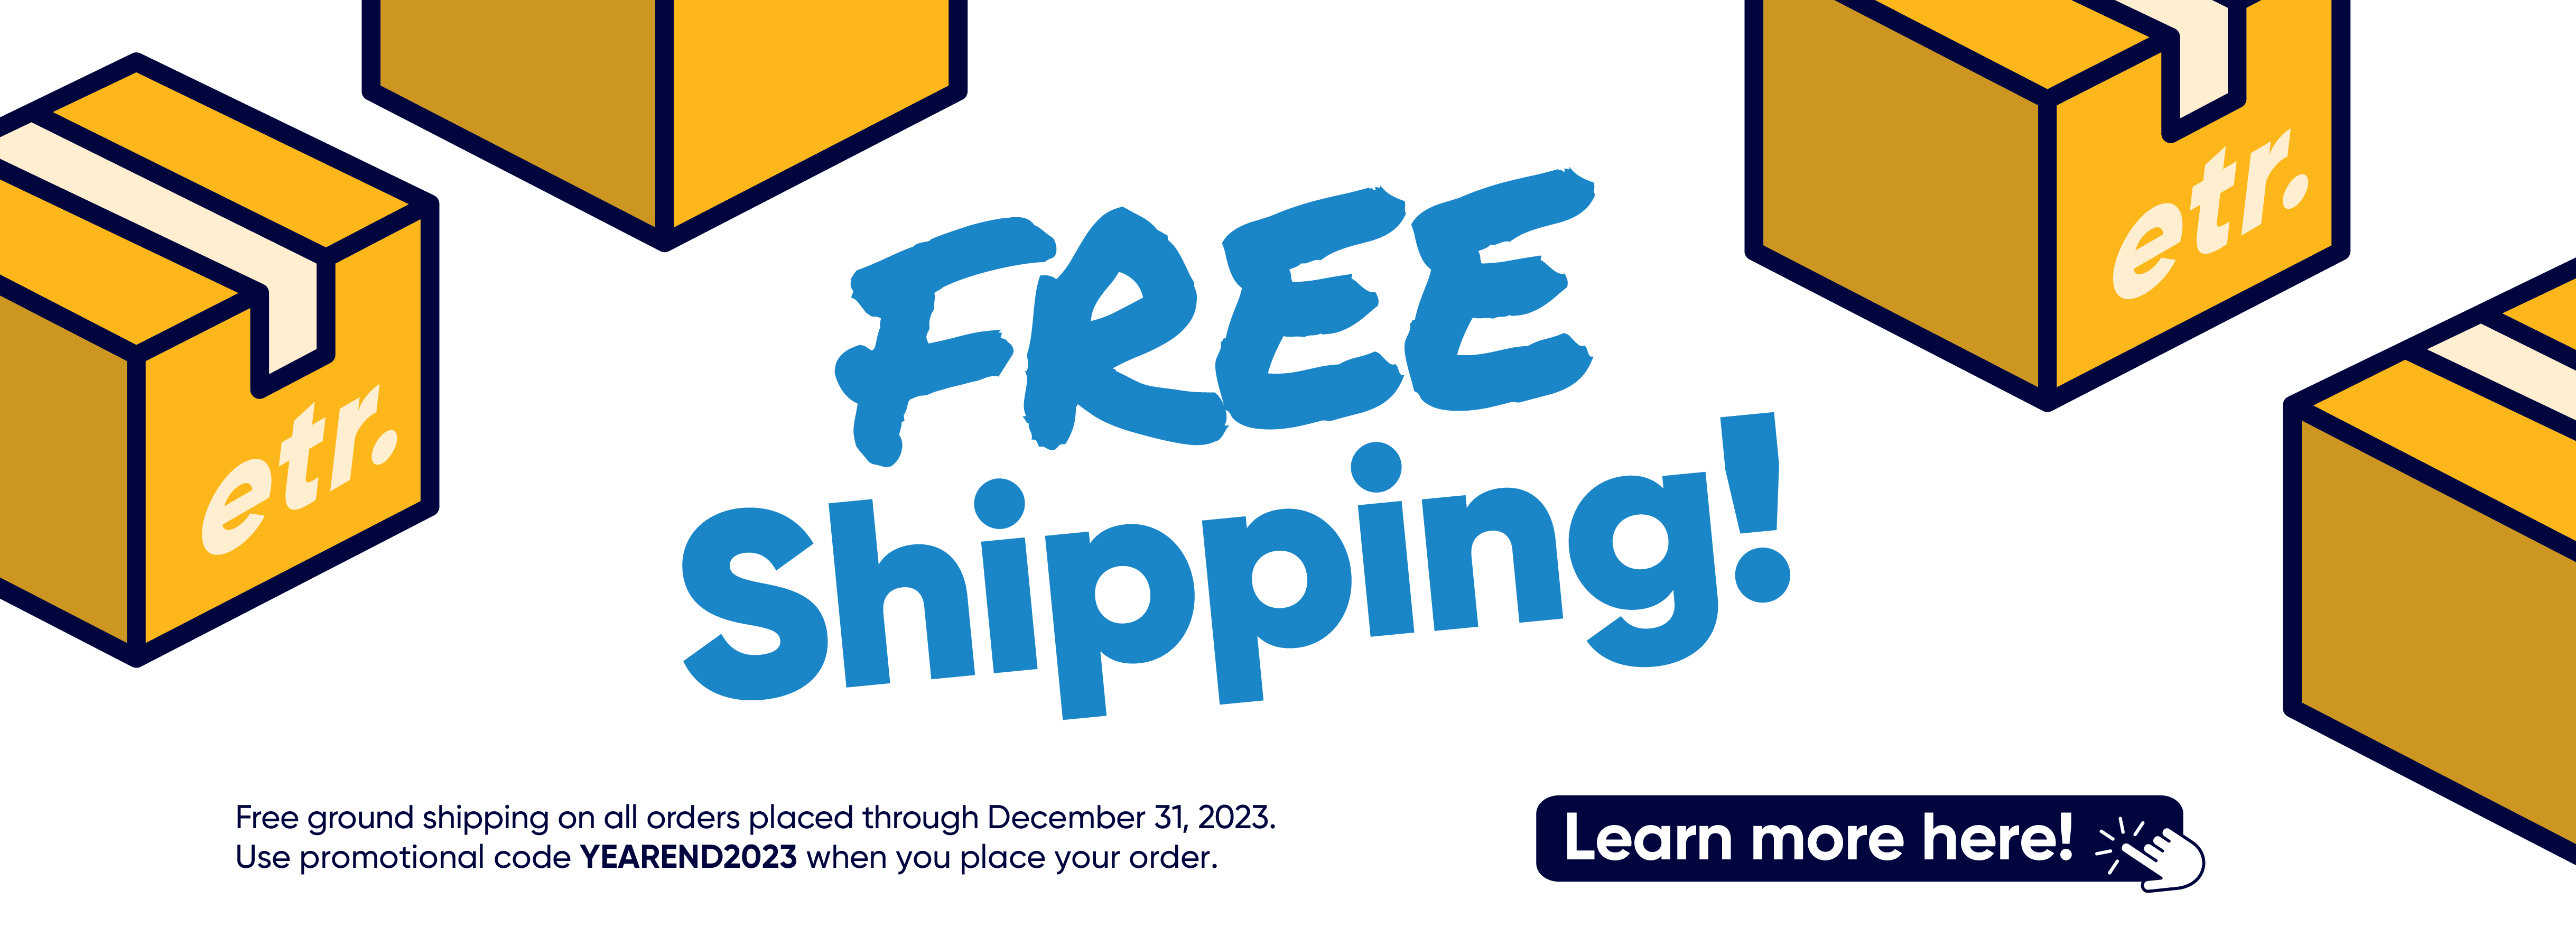 FREE Shipping! Free ground shipping on all orders placed through December 31, 2023. Use promotion code YEAREND2023 when you place your order. Learn more here!